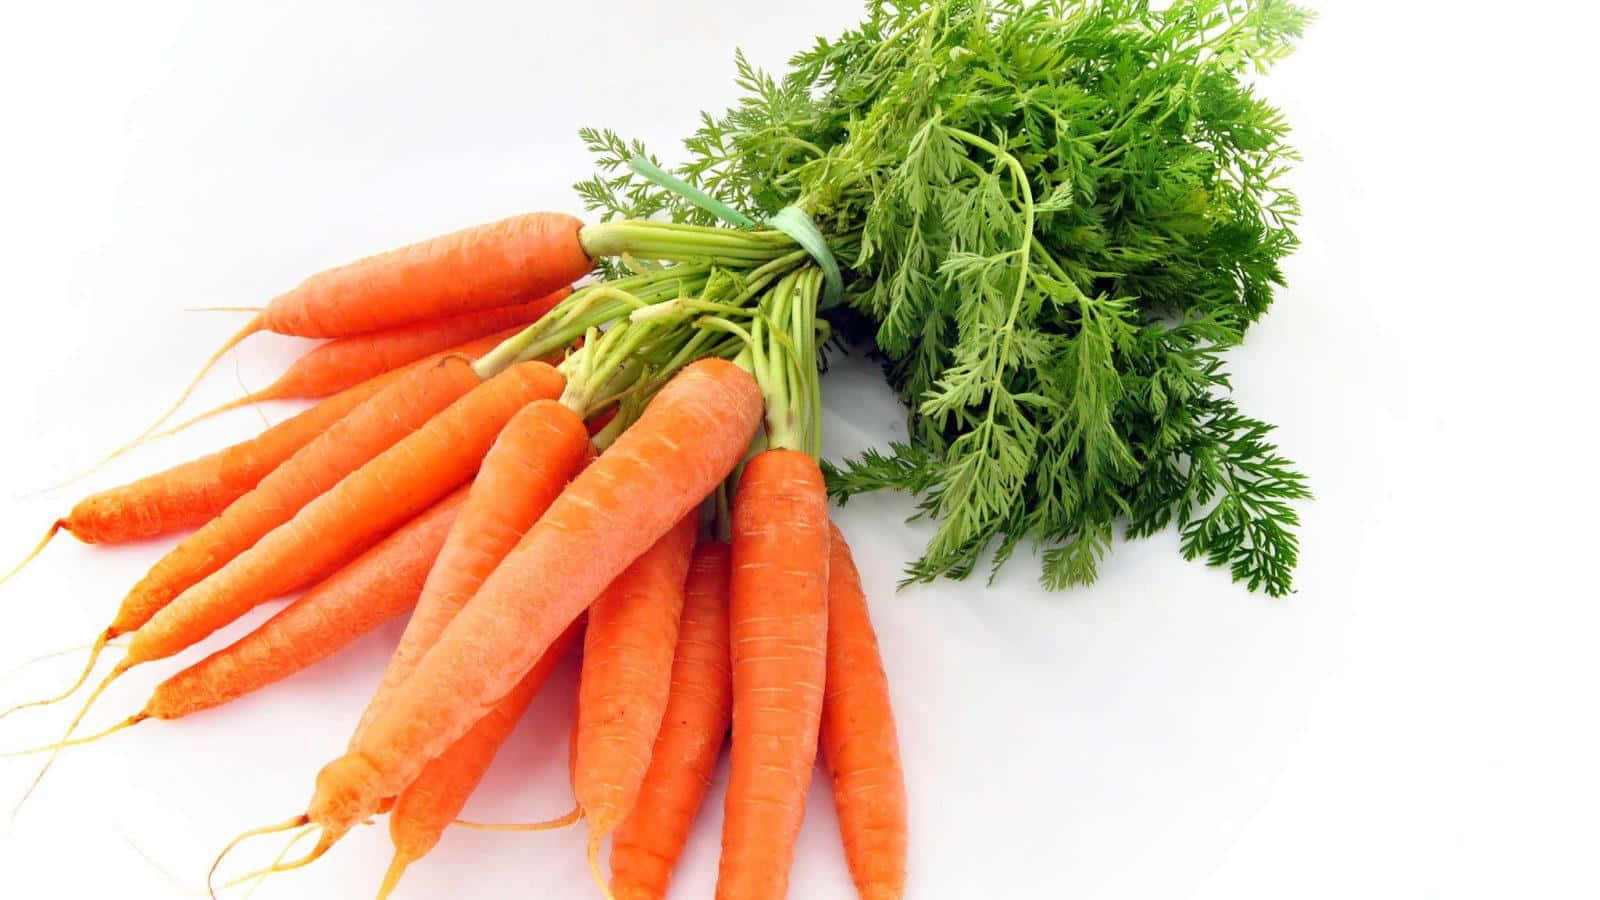 Carrots Are Arranged On A White Surface